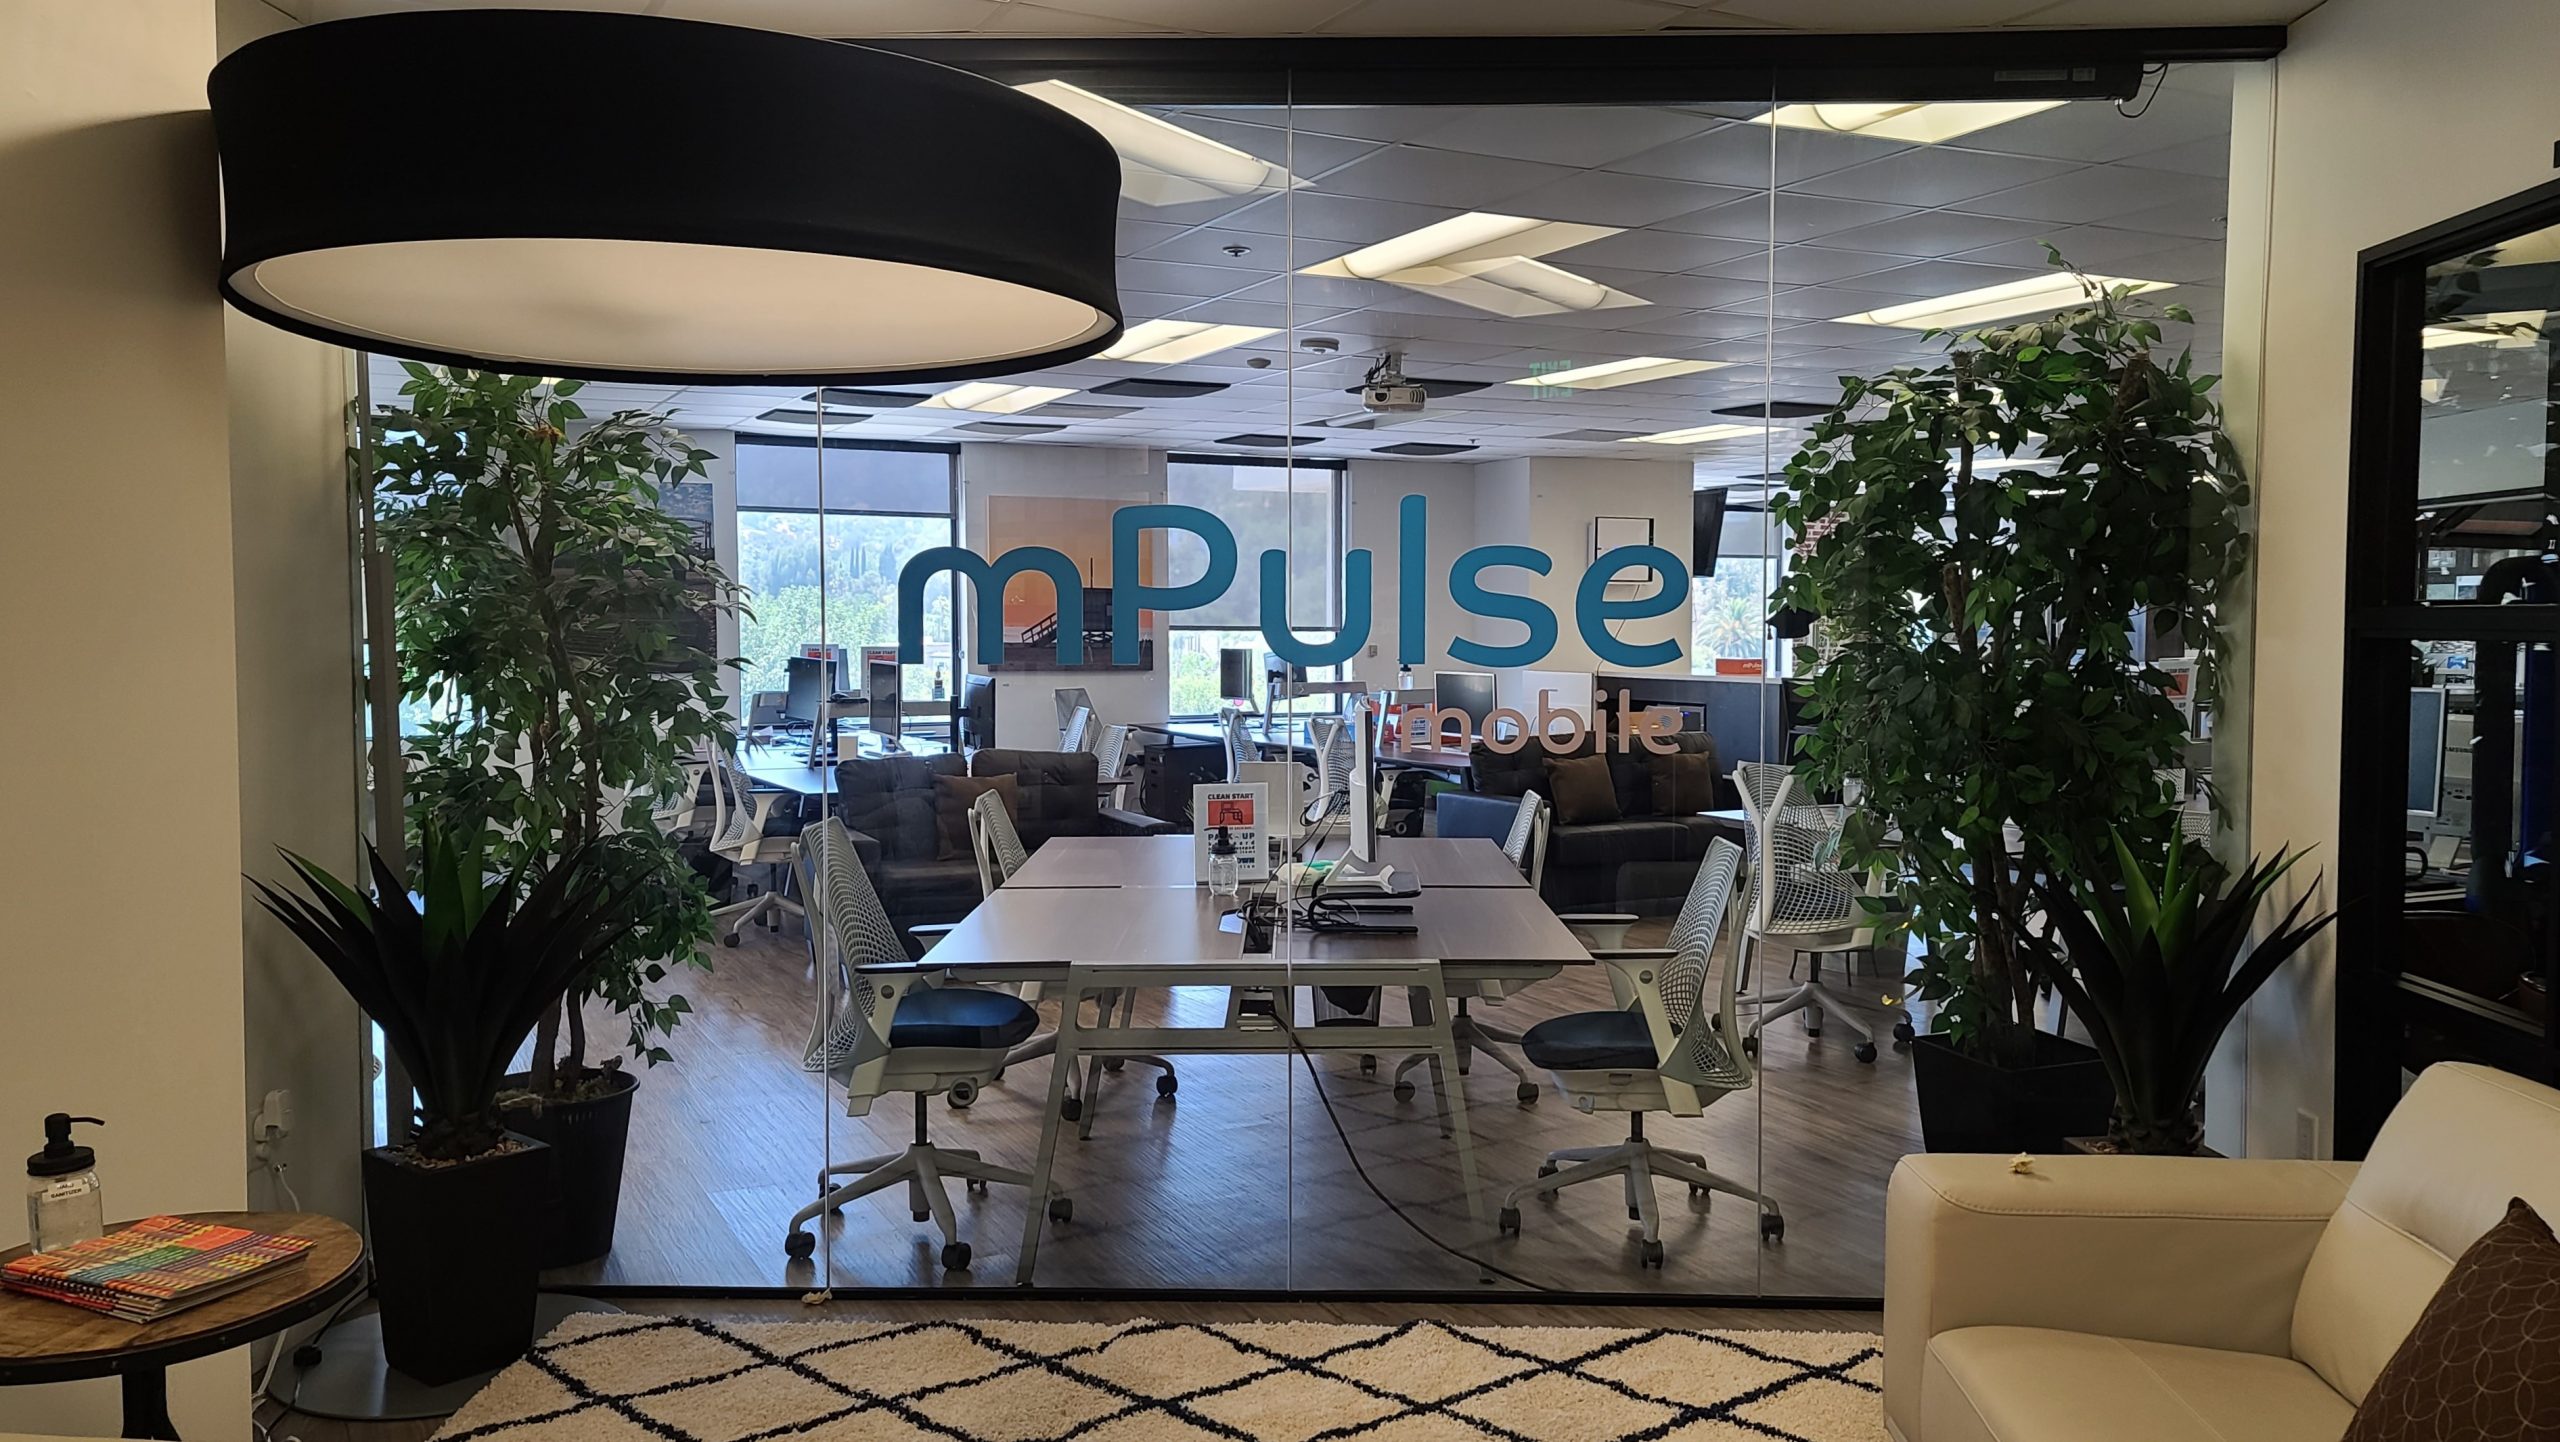 More from our office sign package for mPulse Mobile. These office window graphics enhance their Encino workplace, adding to its sleek and stylish appearance.